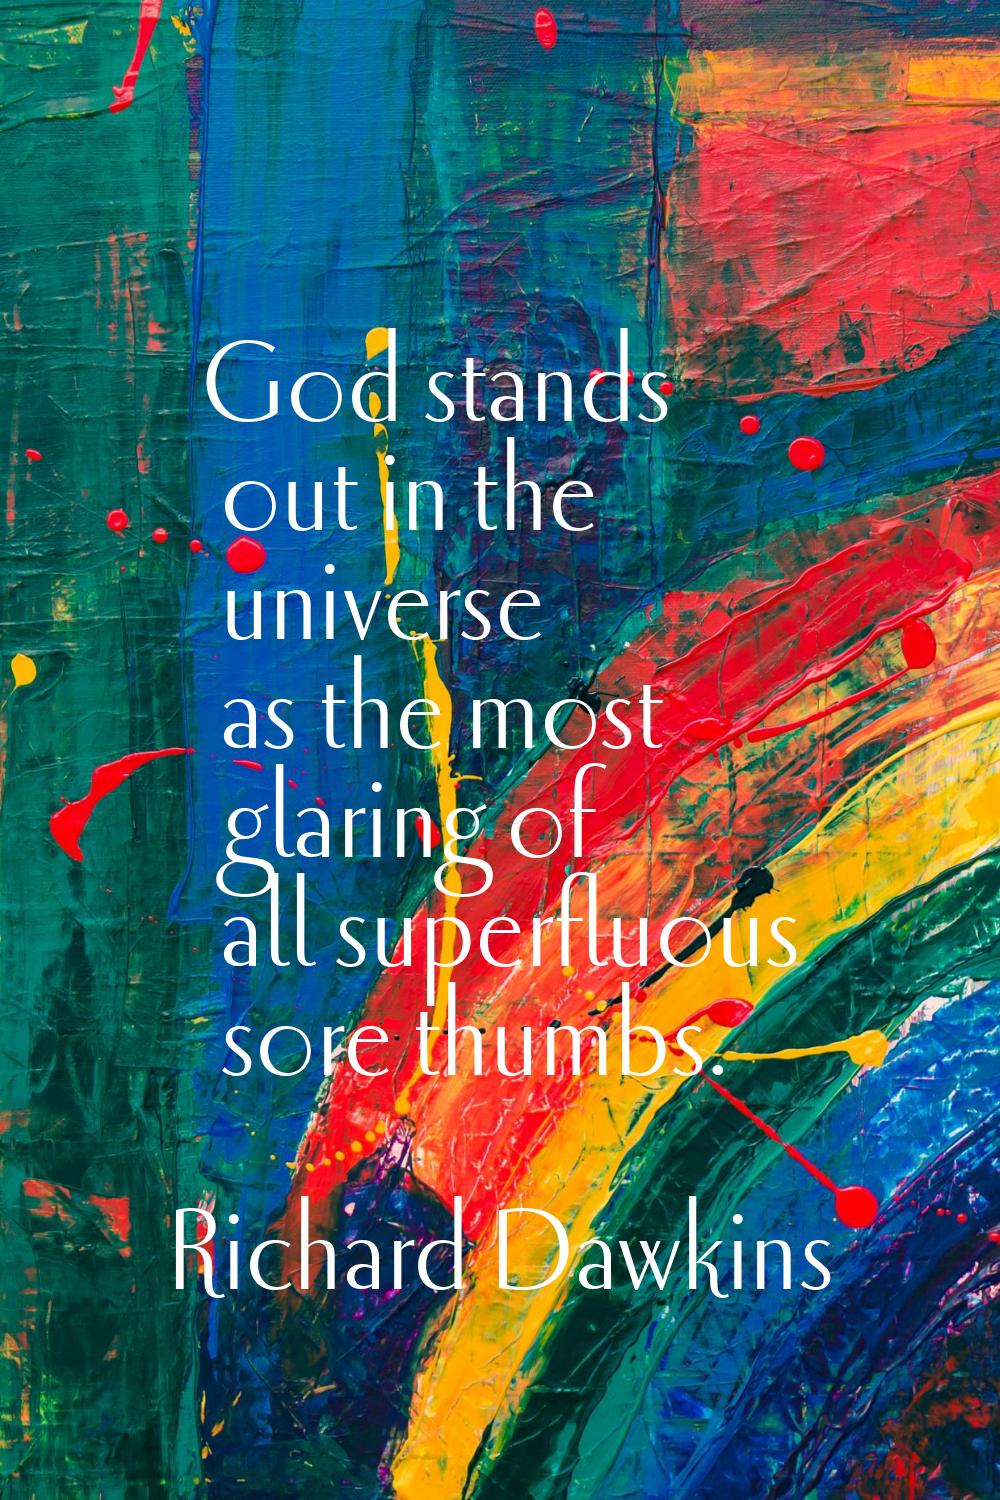 God stands out in the universe as the most glaring of all superfluous sore thumbs.